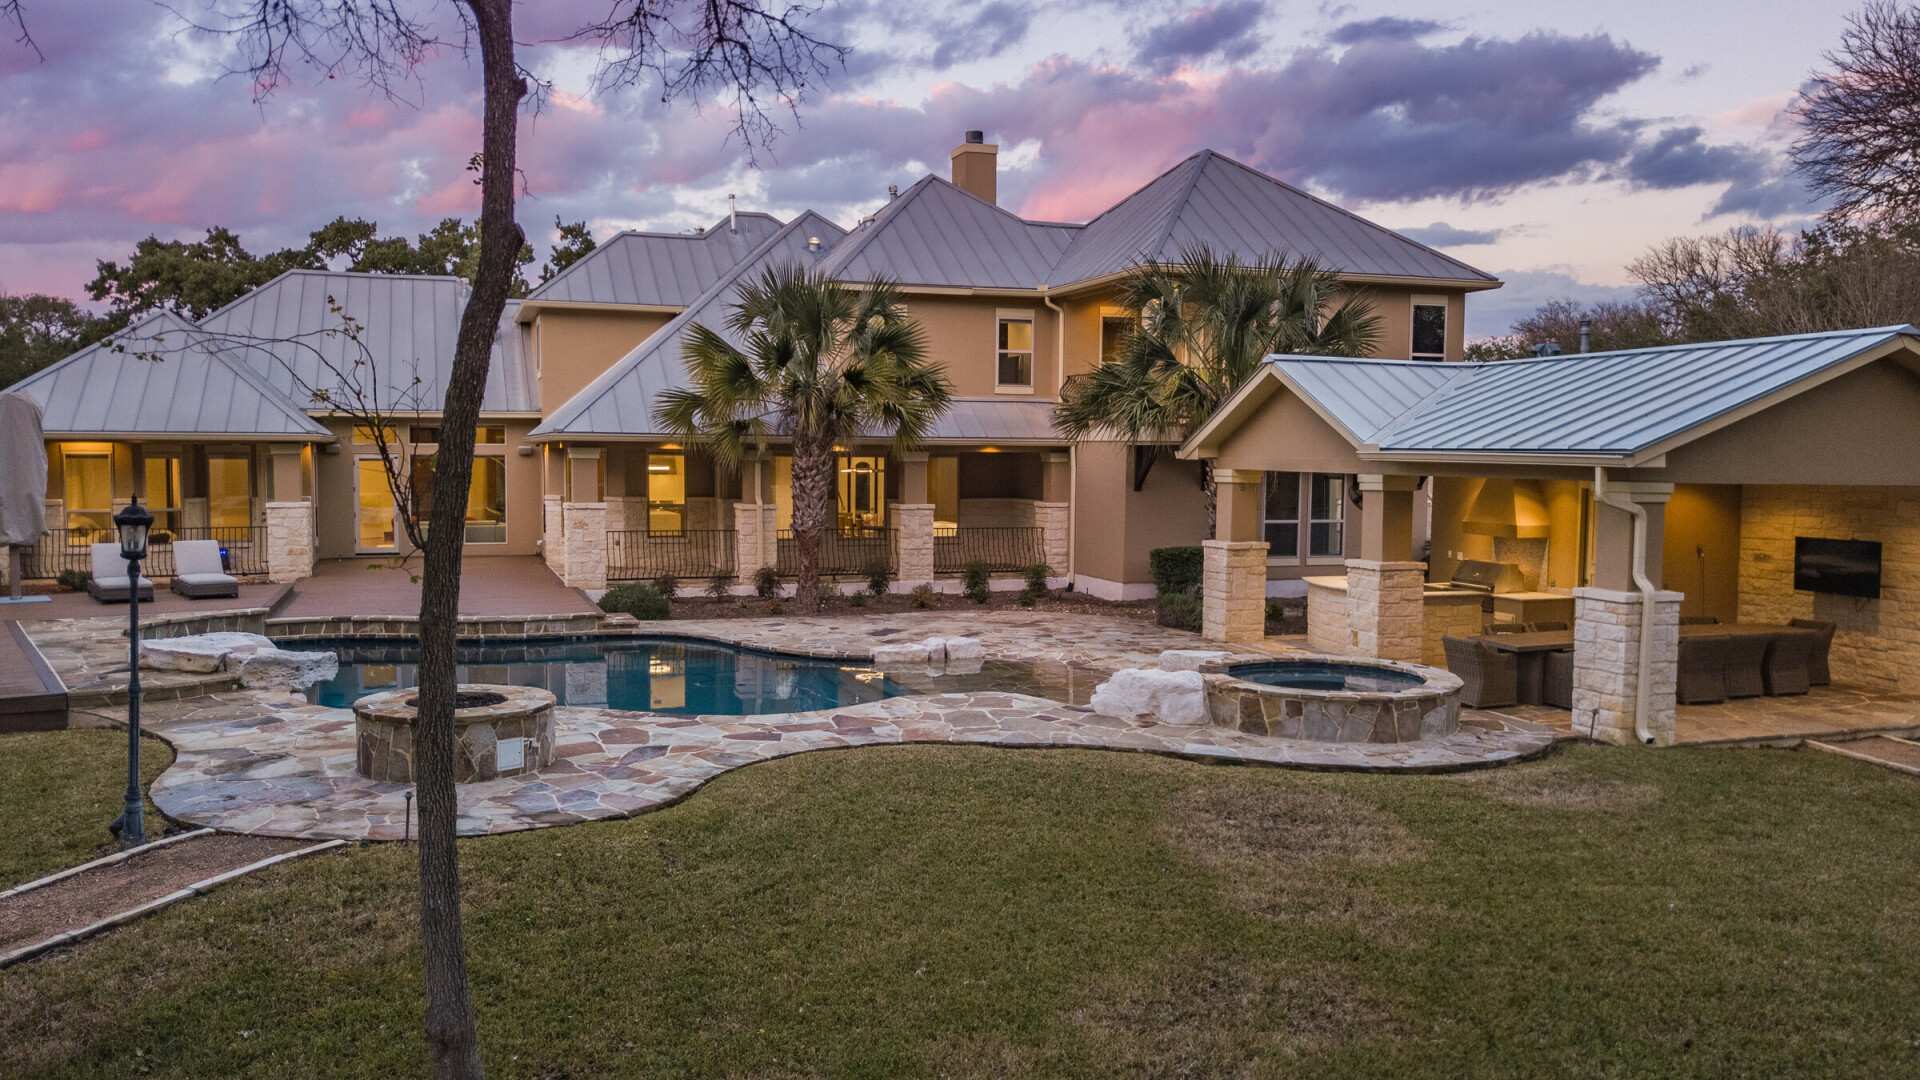 Rear view of a transitional custom home at sunset, San Antonio TX